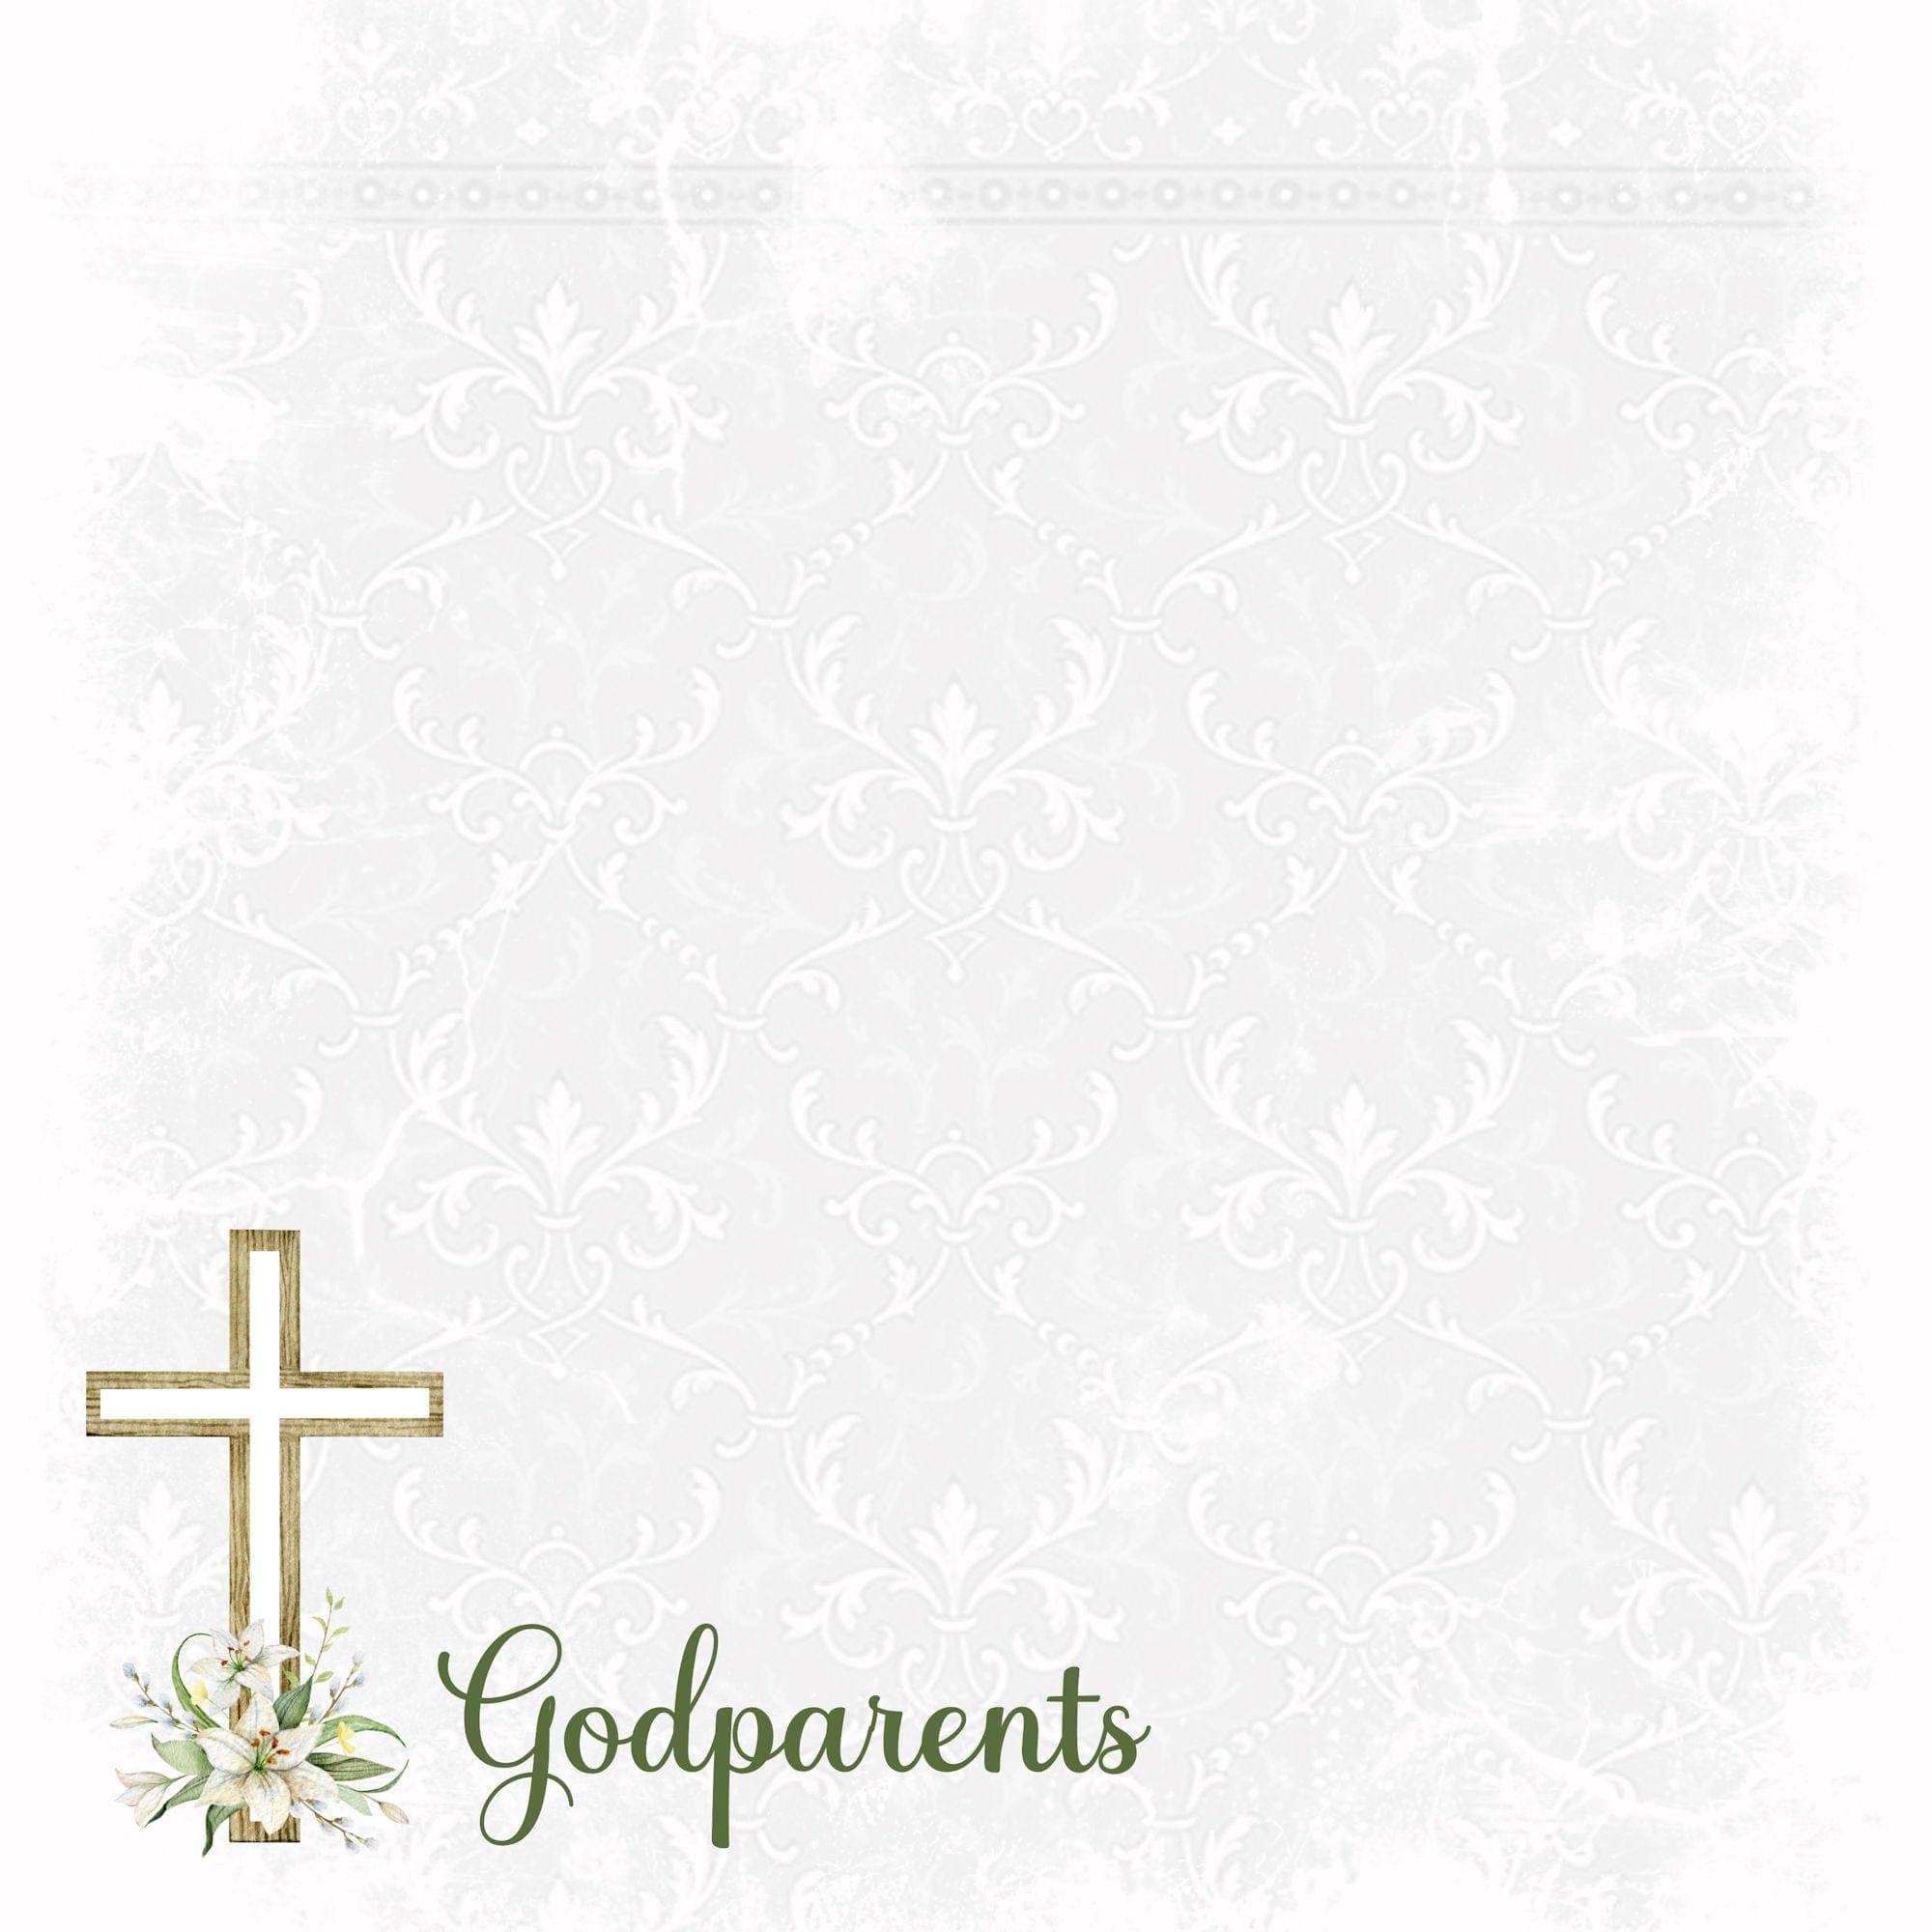 Holy Sacraments Collection Godparents 12 x 12 Double-Sided Scrapbook Paper by SSC Designs - Scrapbook Supply Companies